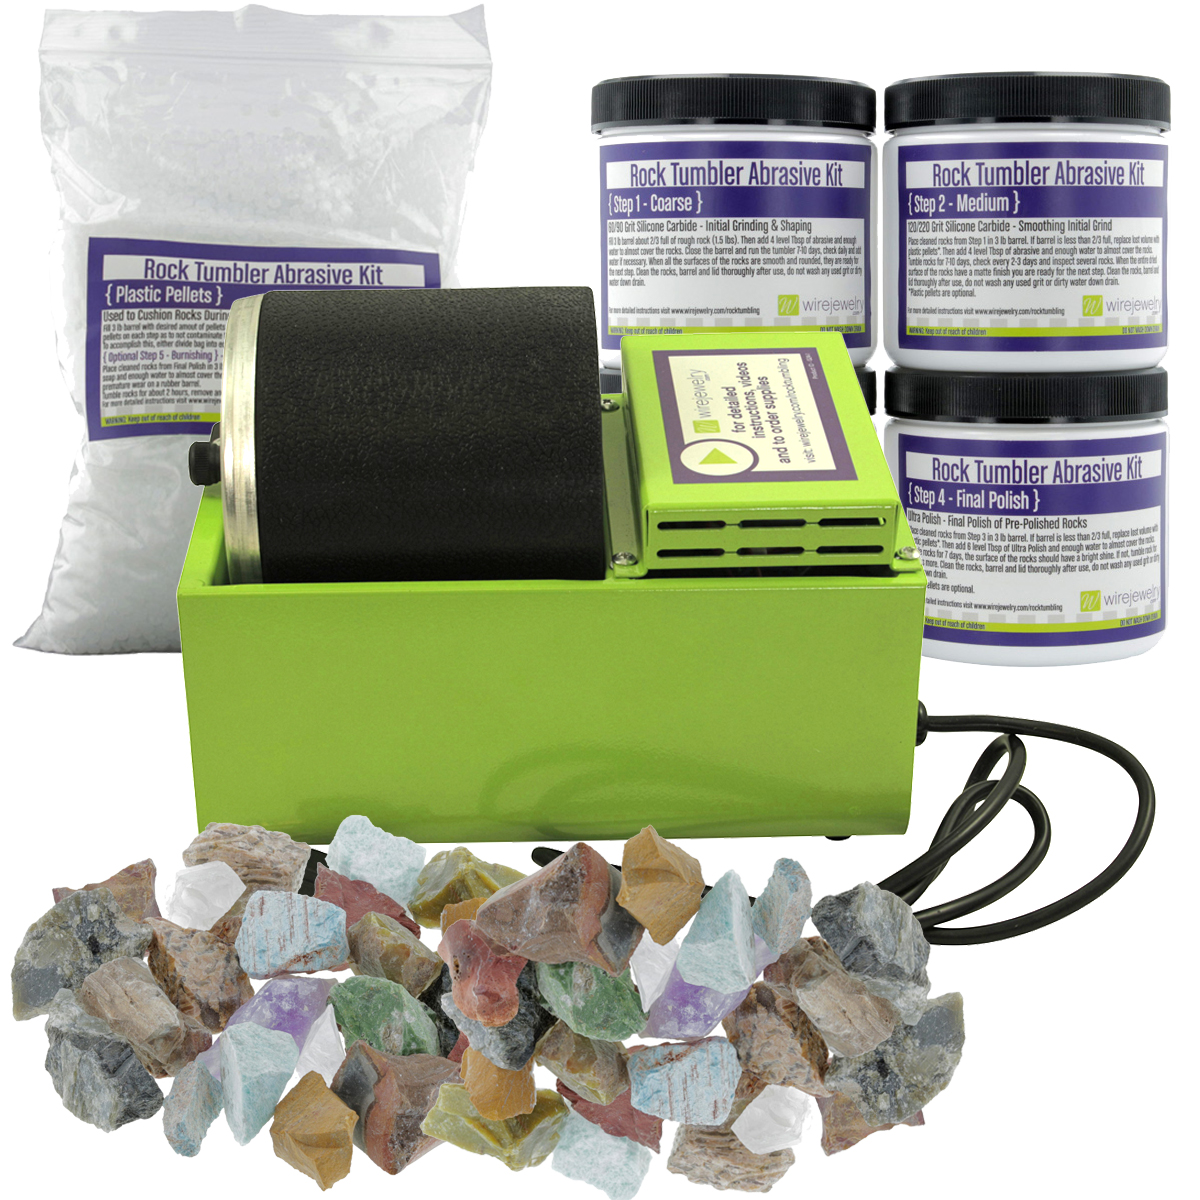 Brazil and Madagascar Stone Mixes and 6 Batches of 4 Step Abrasive Grit and Polish WireJewelry World Stone Mix Rock Tumbler Refill Kit Each of Asia 3 Lbs 